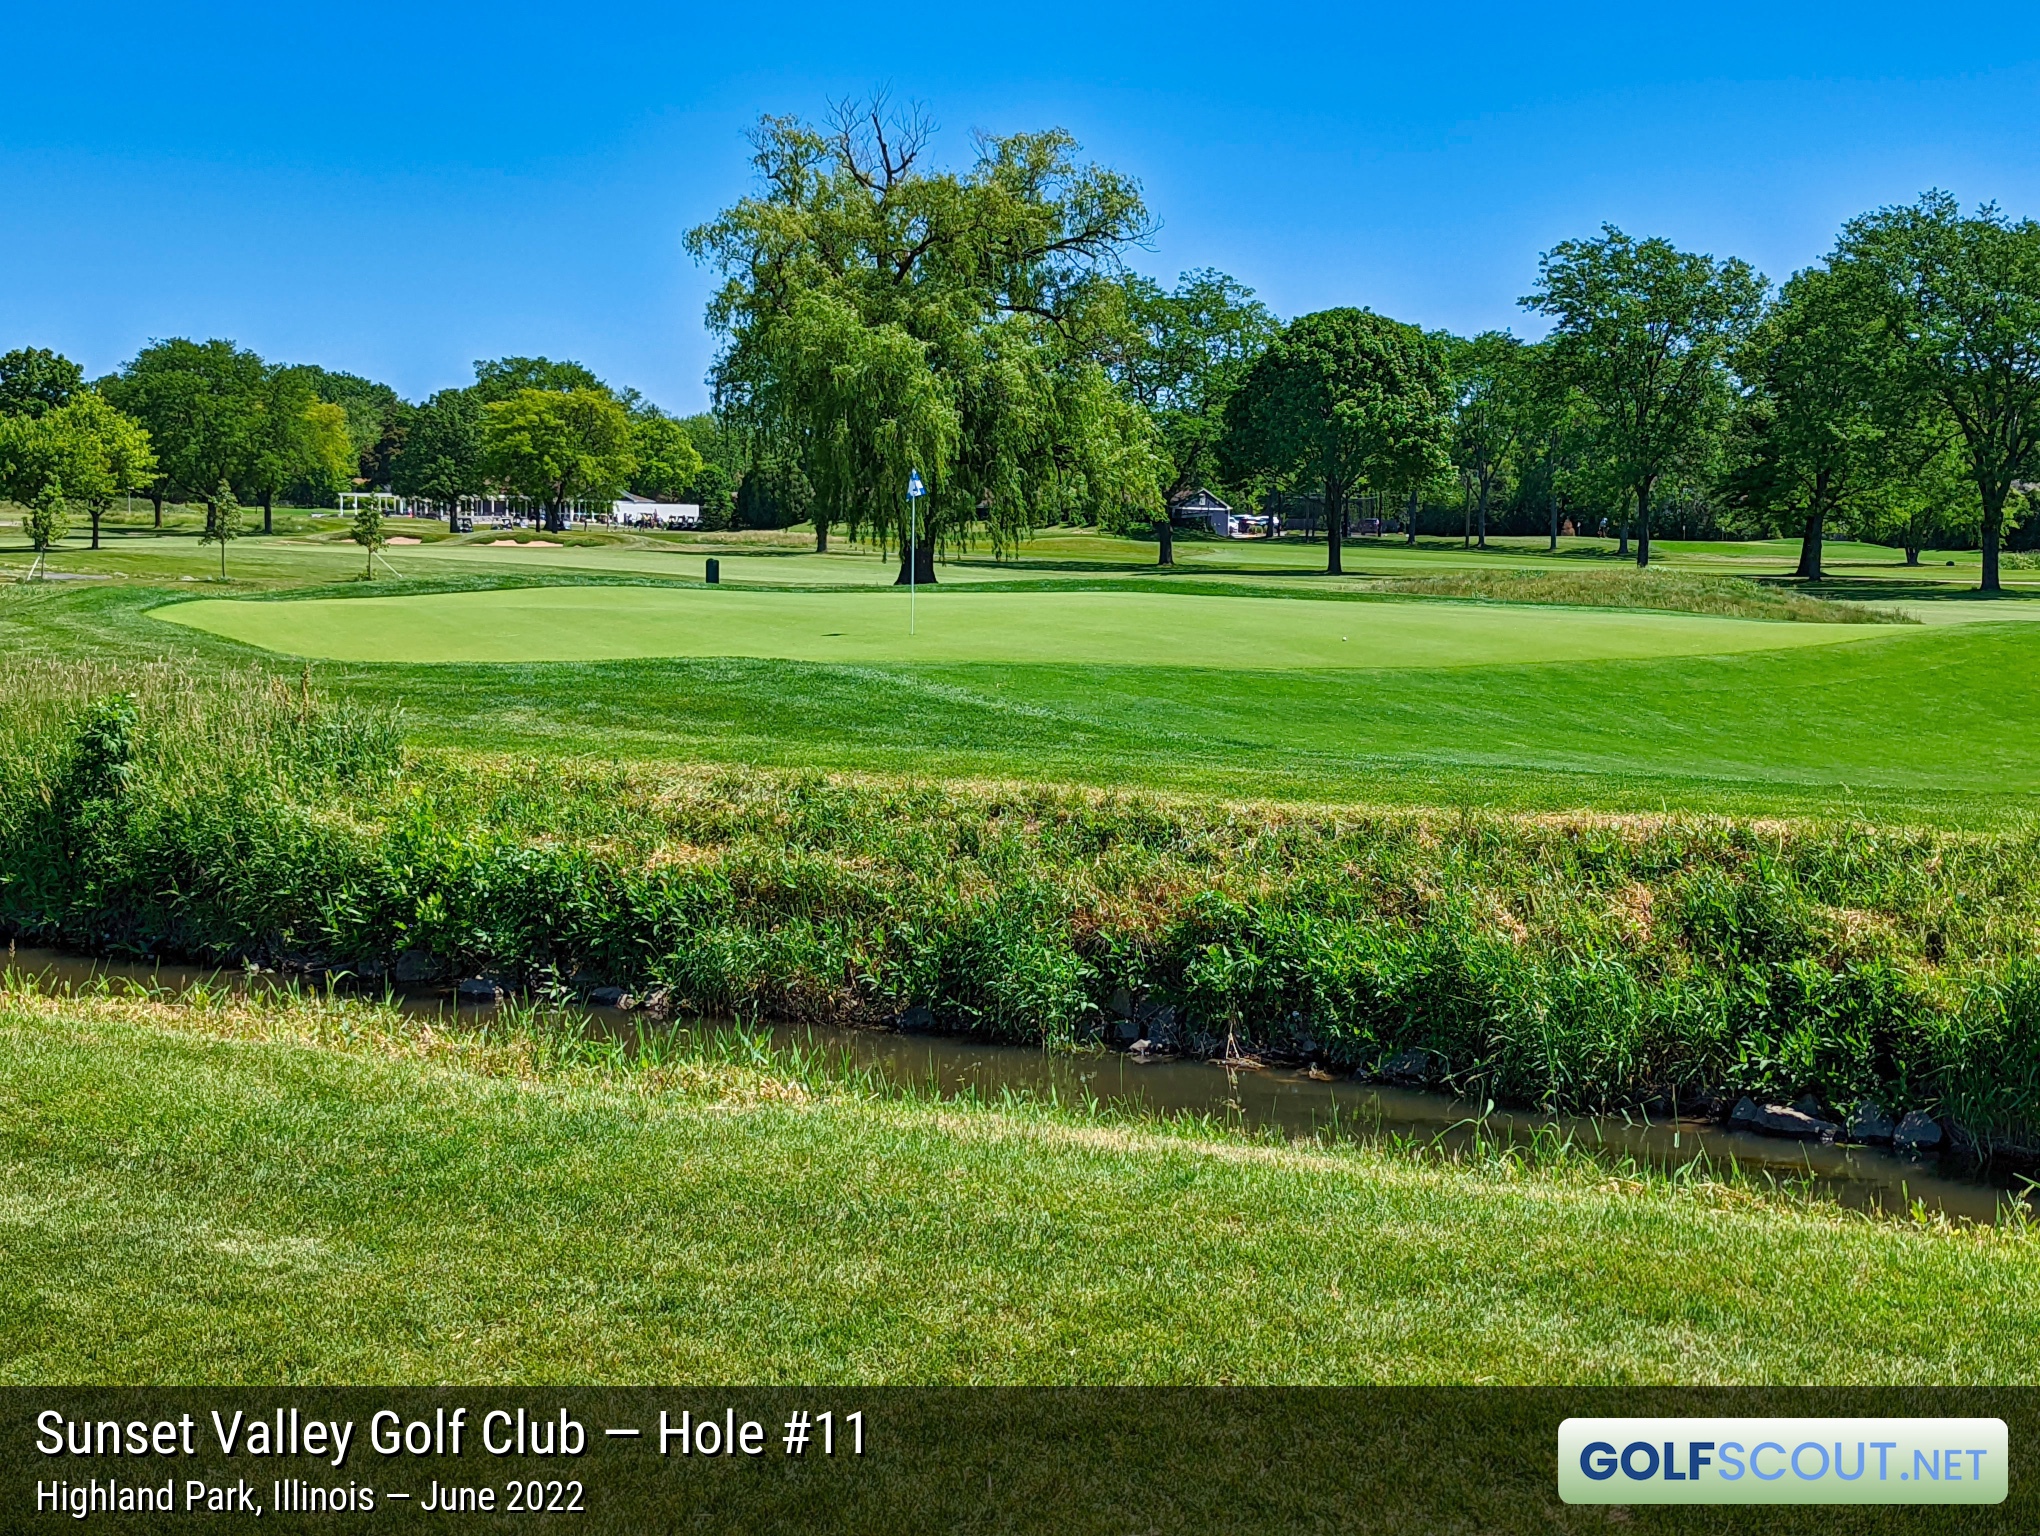 Photo of hole #11 at Sunset Valley Golf Club in Highland Park, Illinois. 